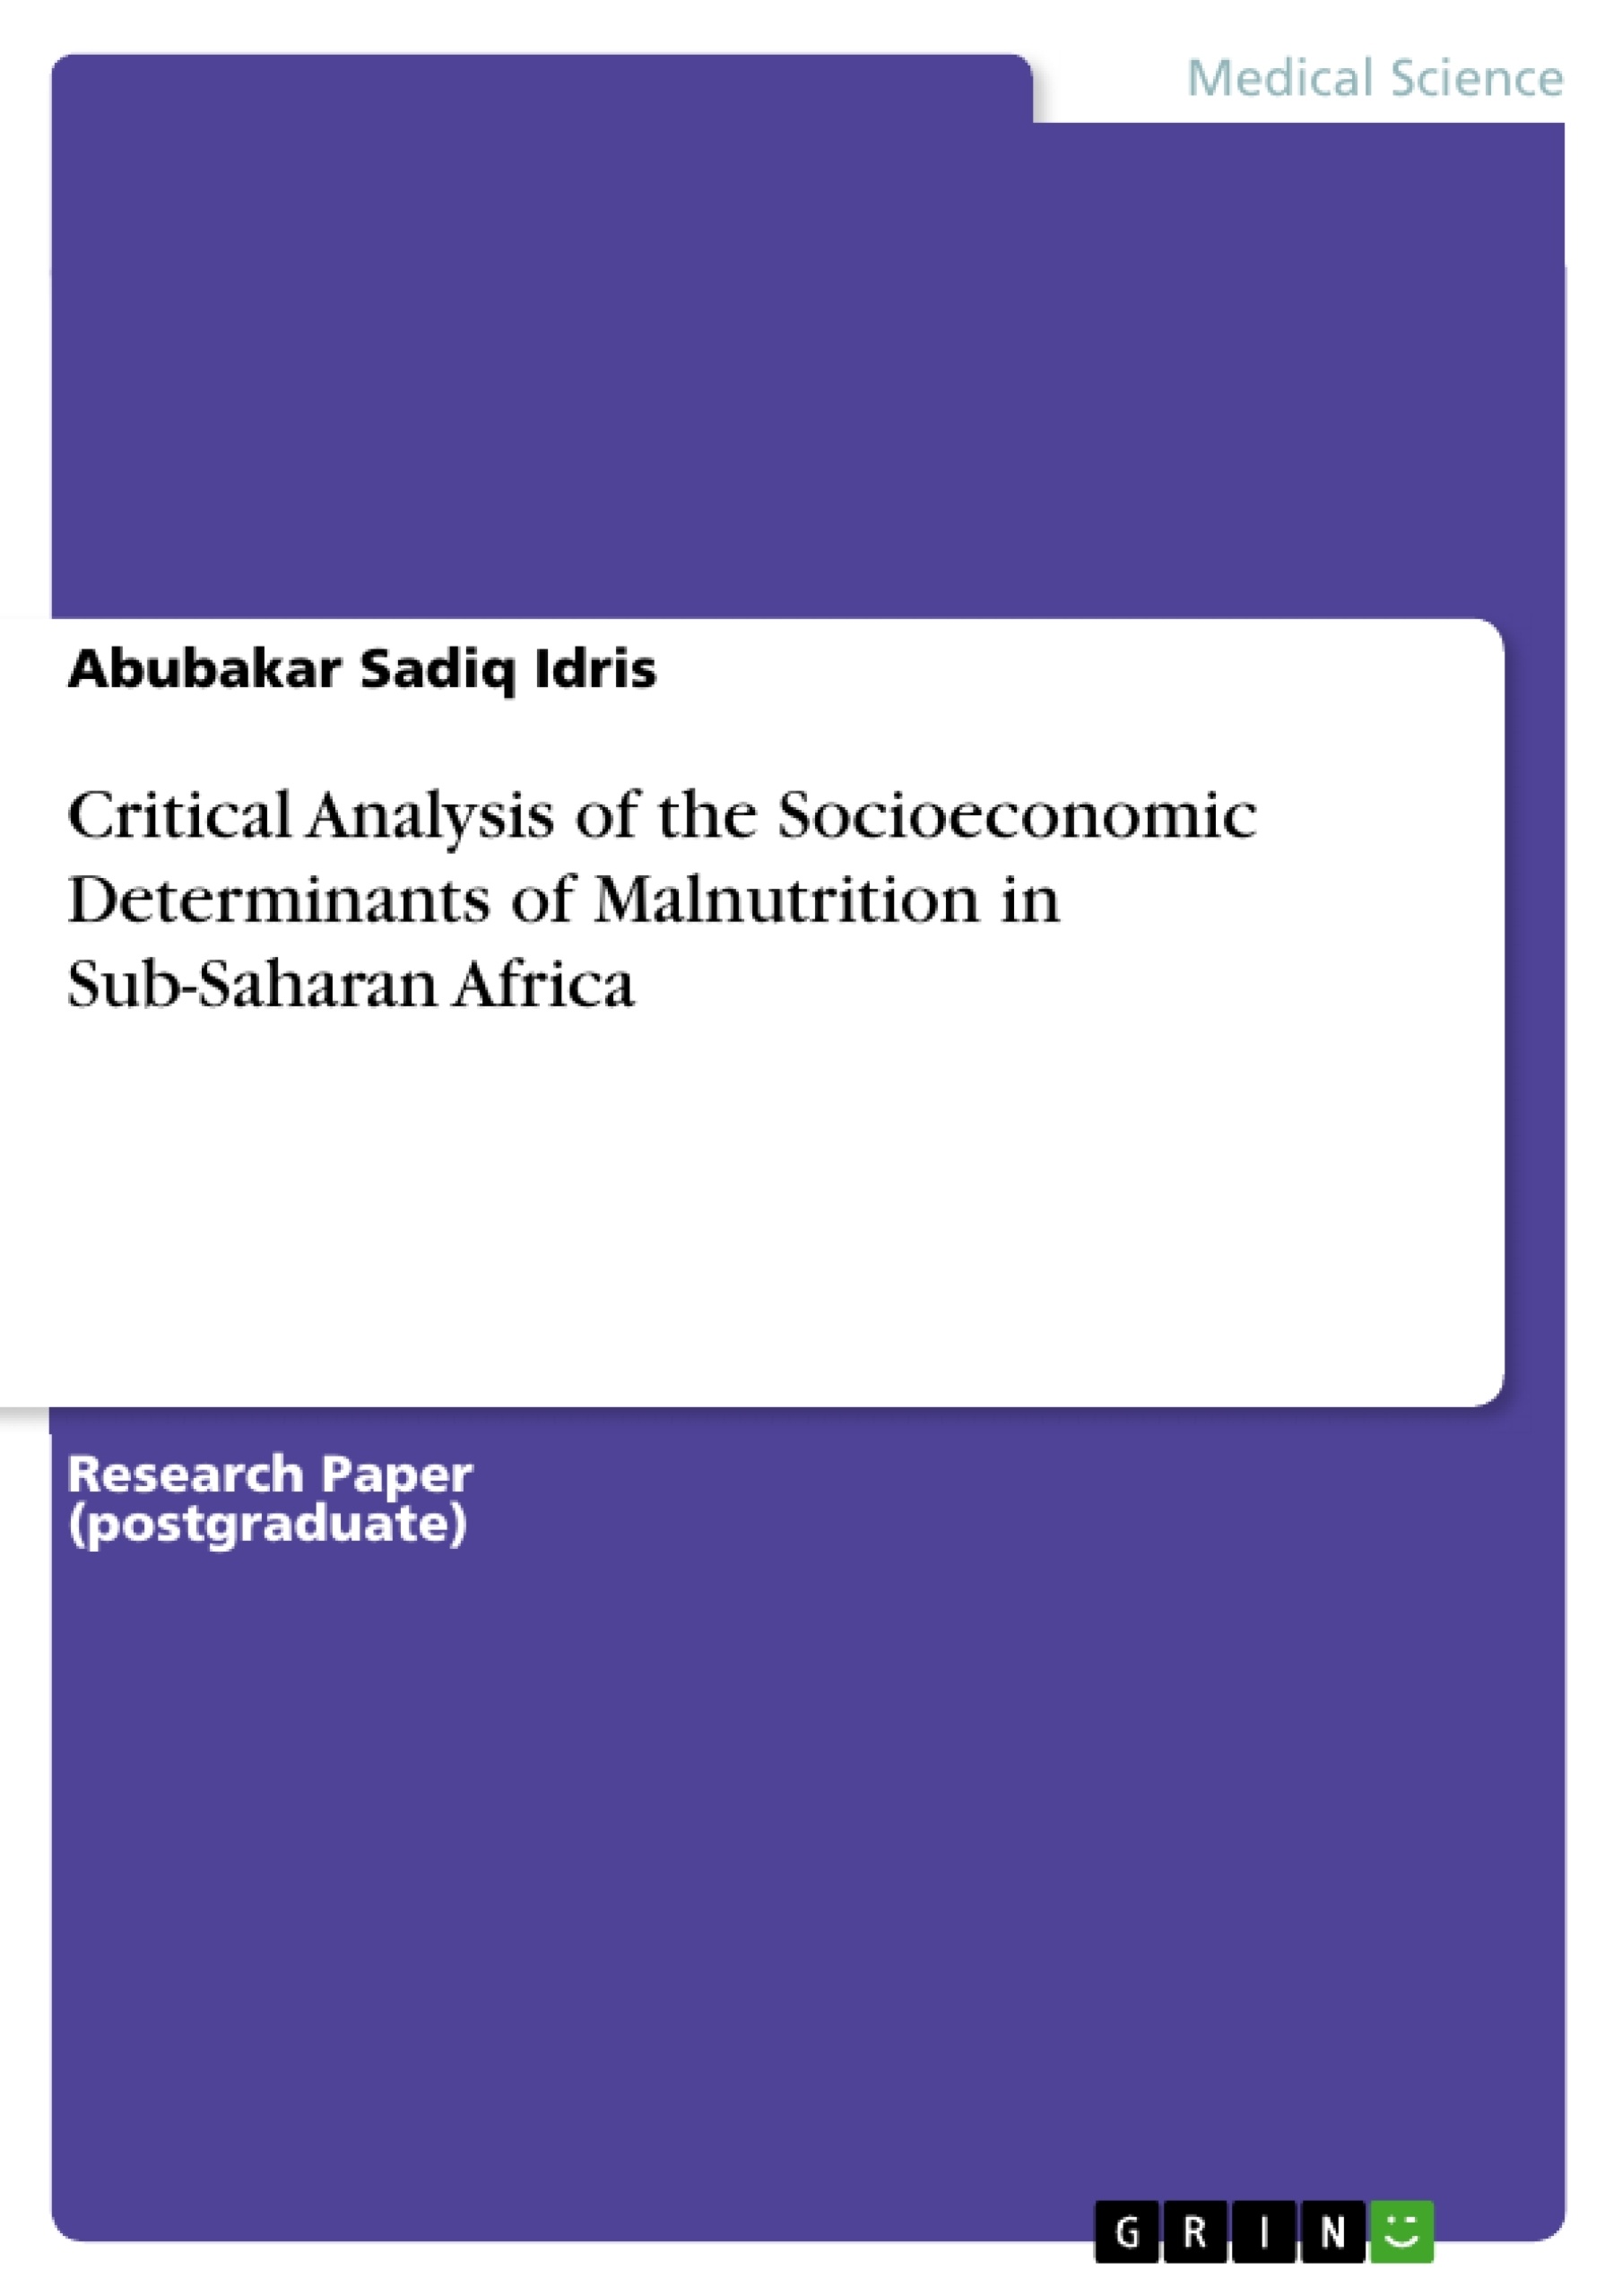 Titre: Critical Analysis of the Socioeconomic Determinants of Malnutrition in Sub-Saharan Africa